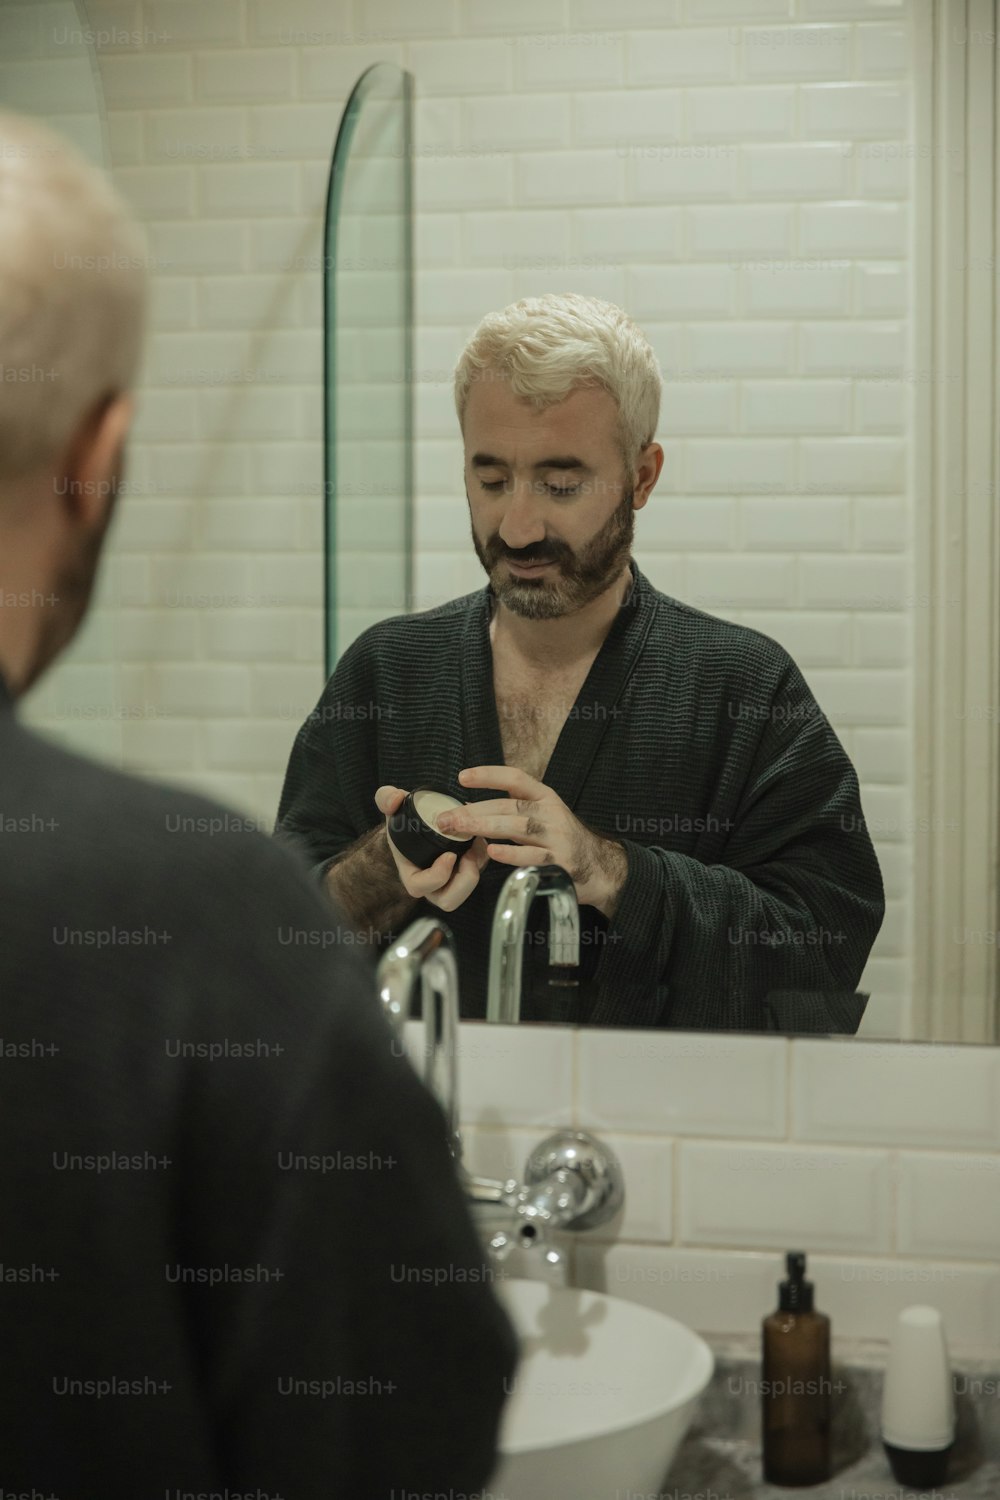 a man with a goatee is looking at his reflection in the mirror